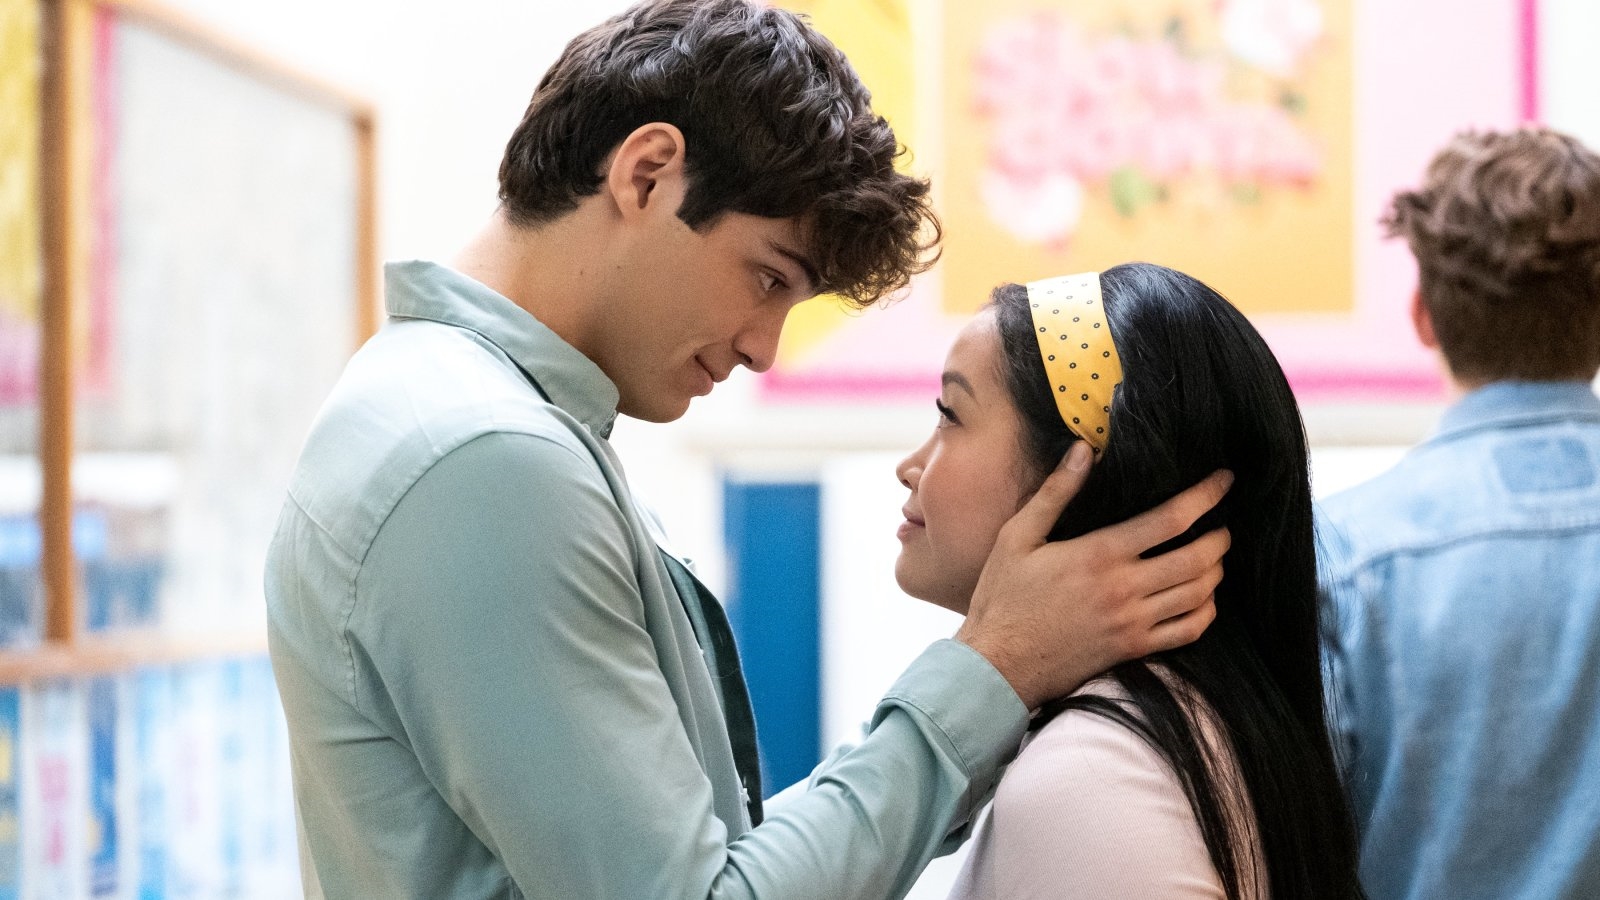 Netflix will let anyone stream 'To All the Boys I've Loved Before' for free | DeviceDaily.com